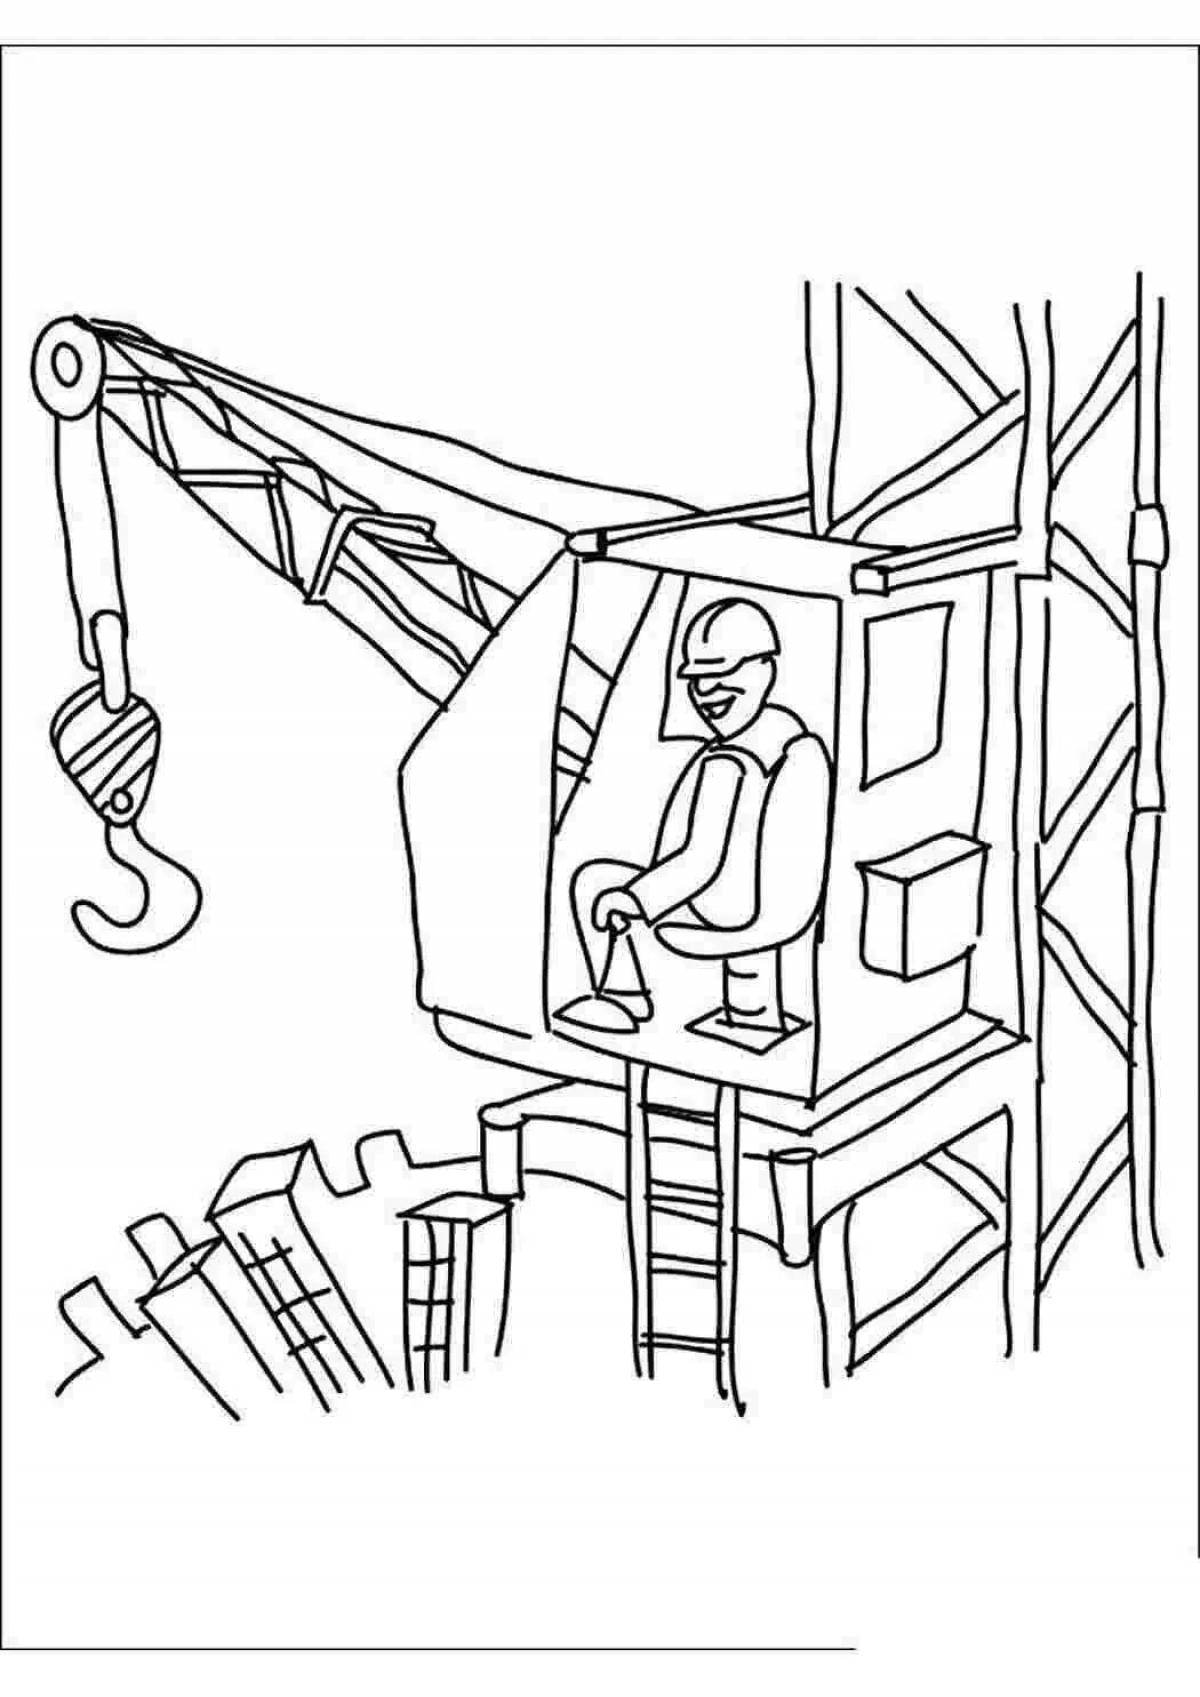 Charming metallurgist coloring page